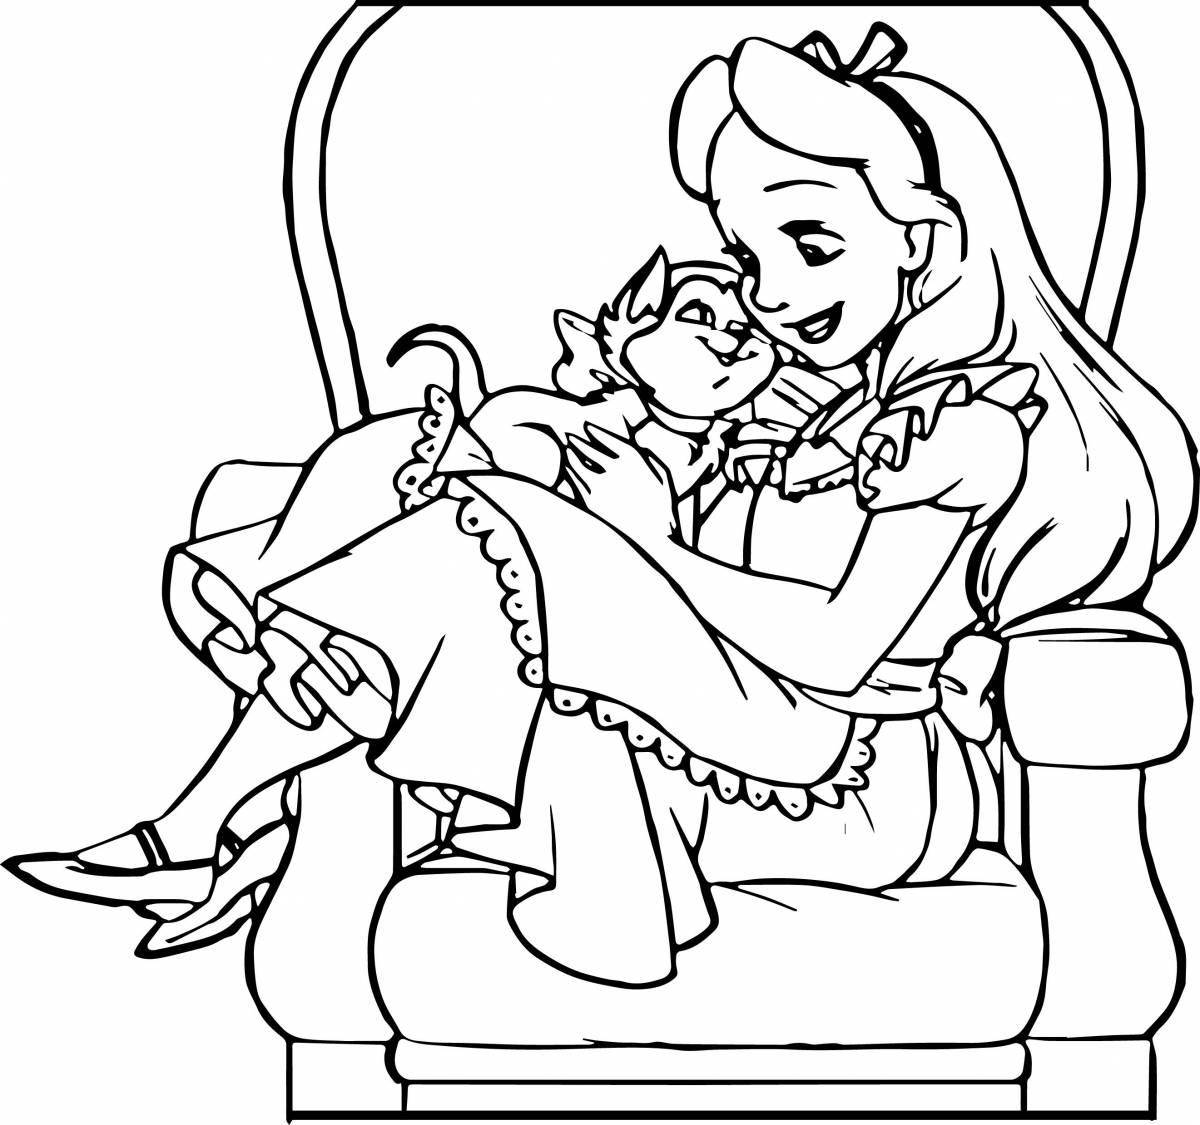 Fairy alice finds a coloring book